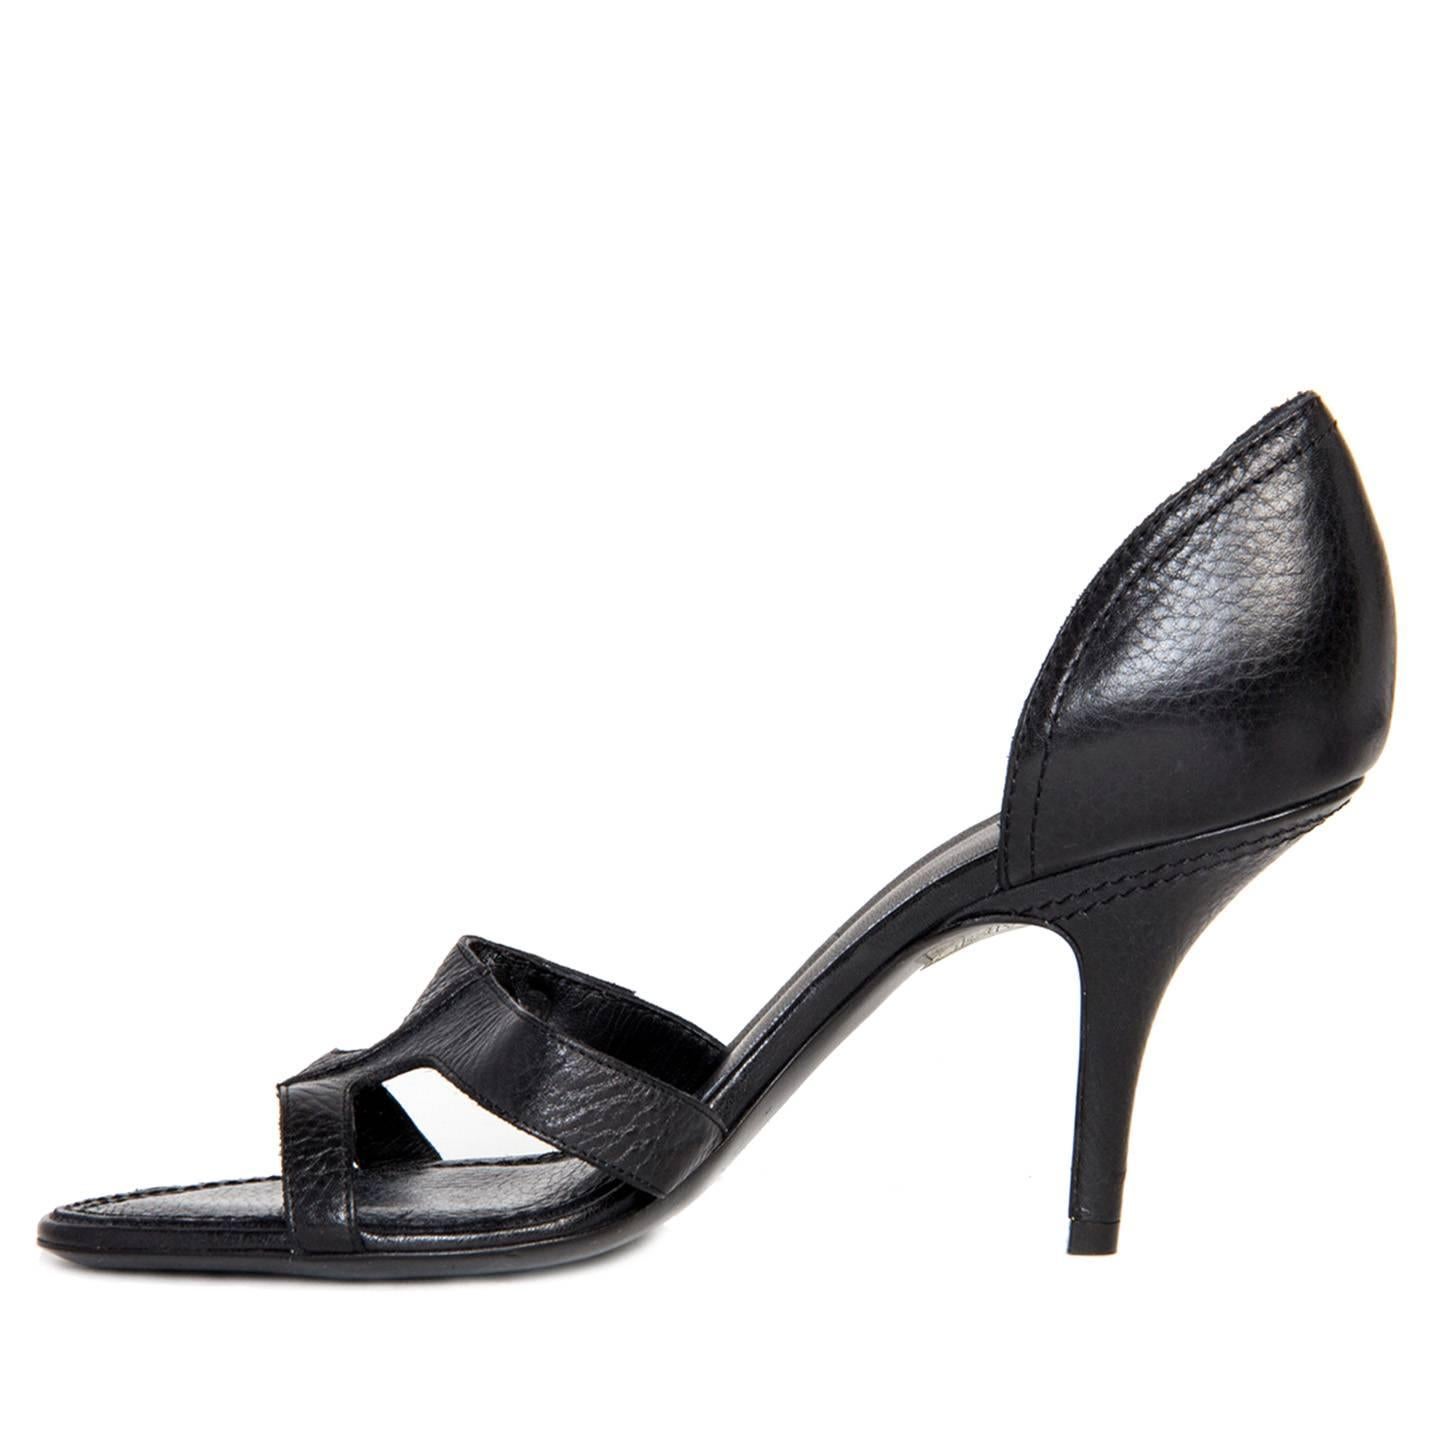 Givenchy Black Heeled Sandals In New Condition For Sale In Brooklyn, NY